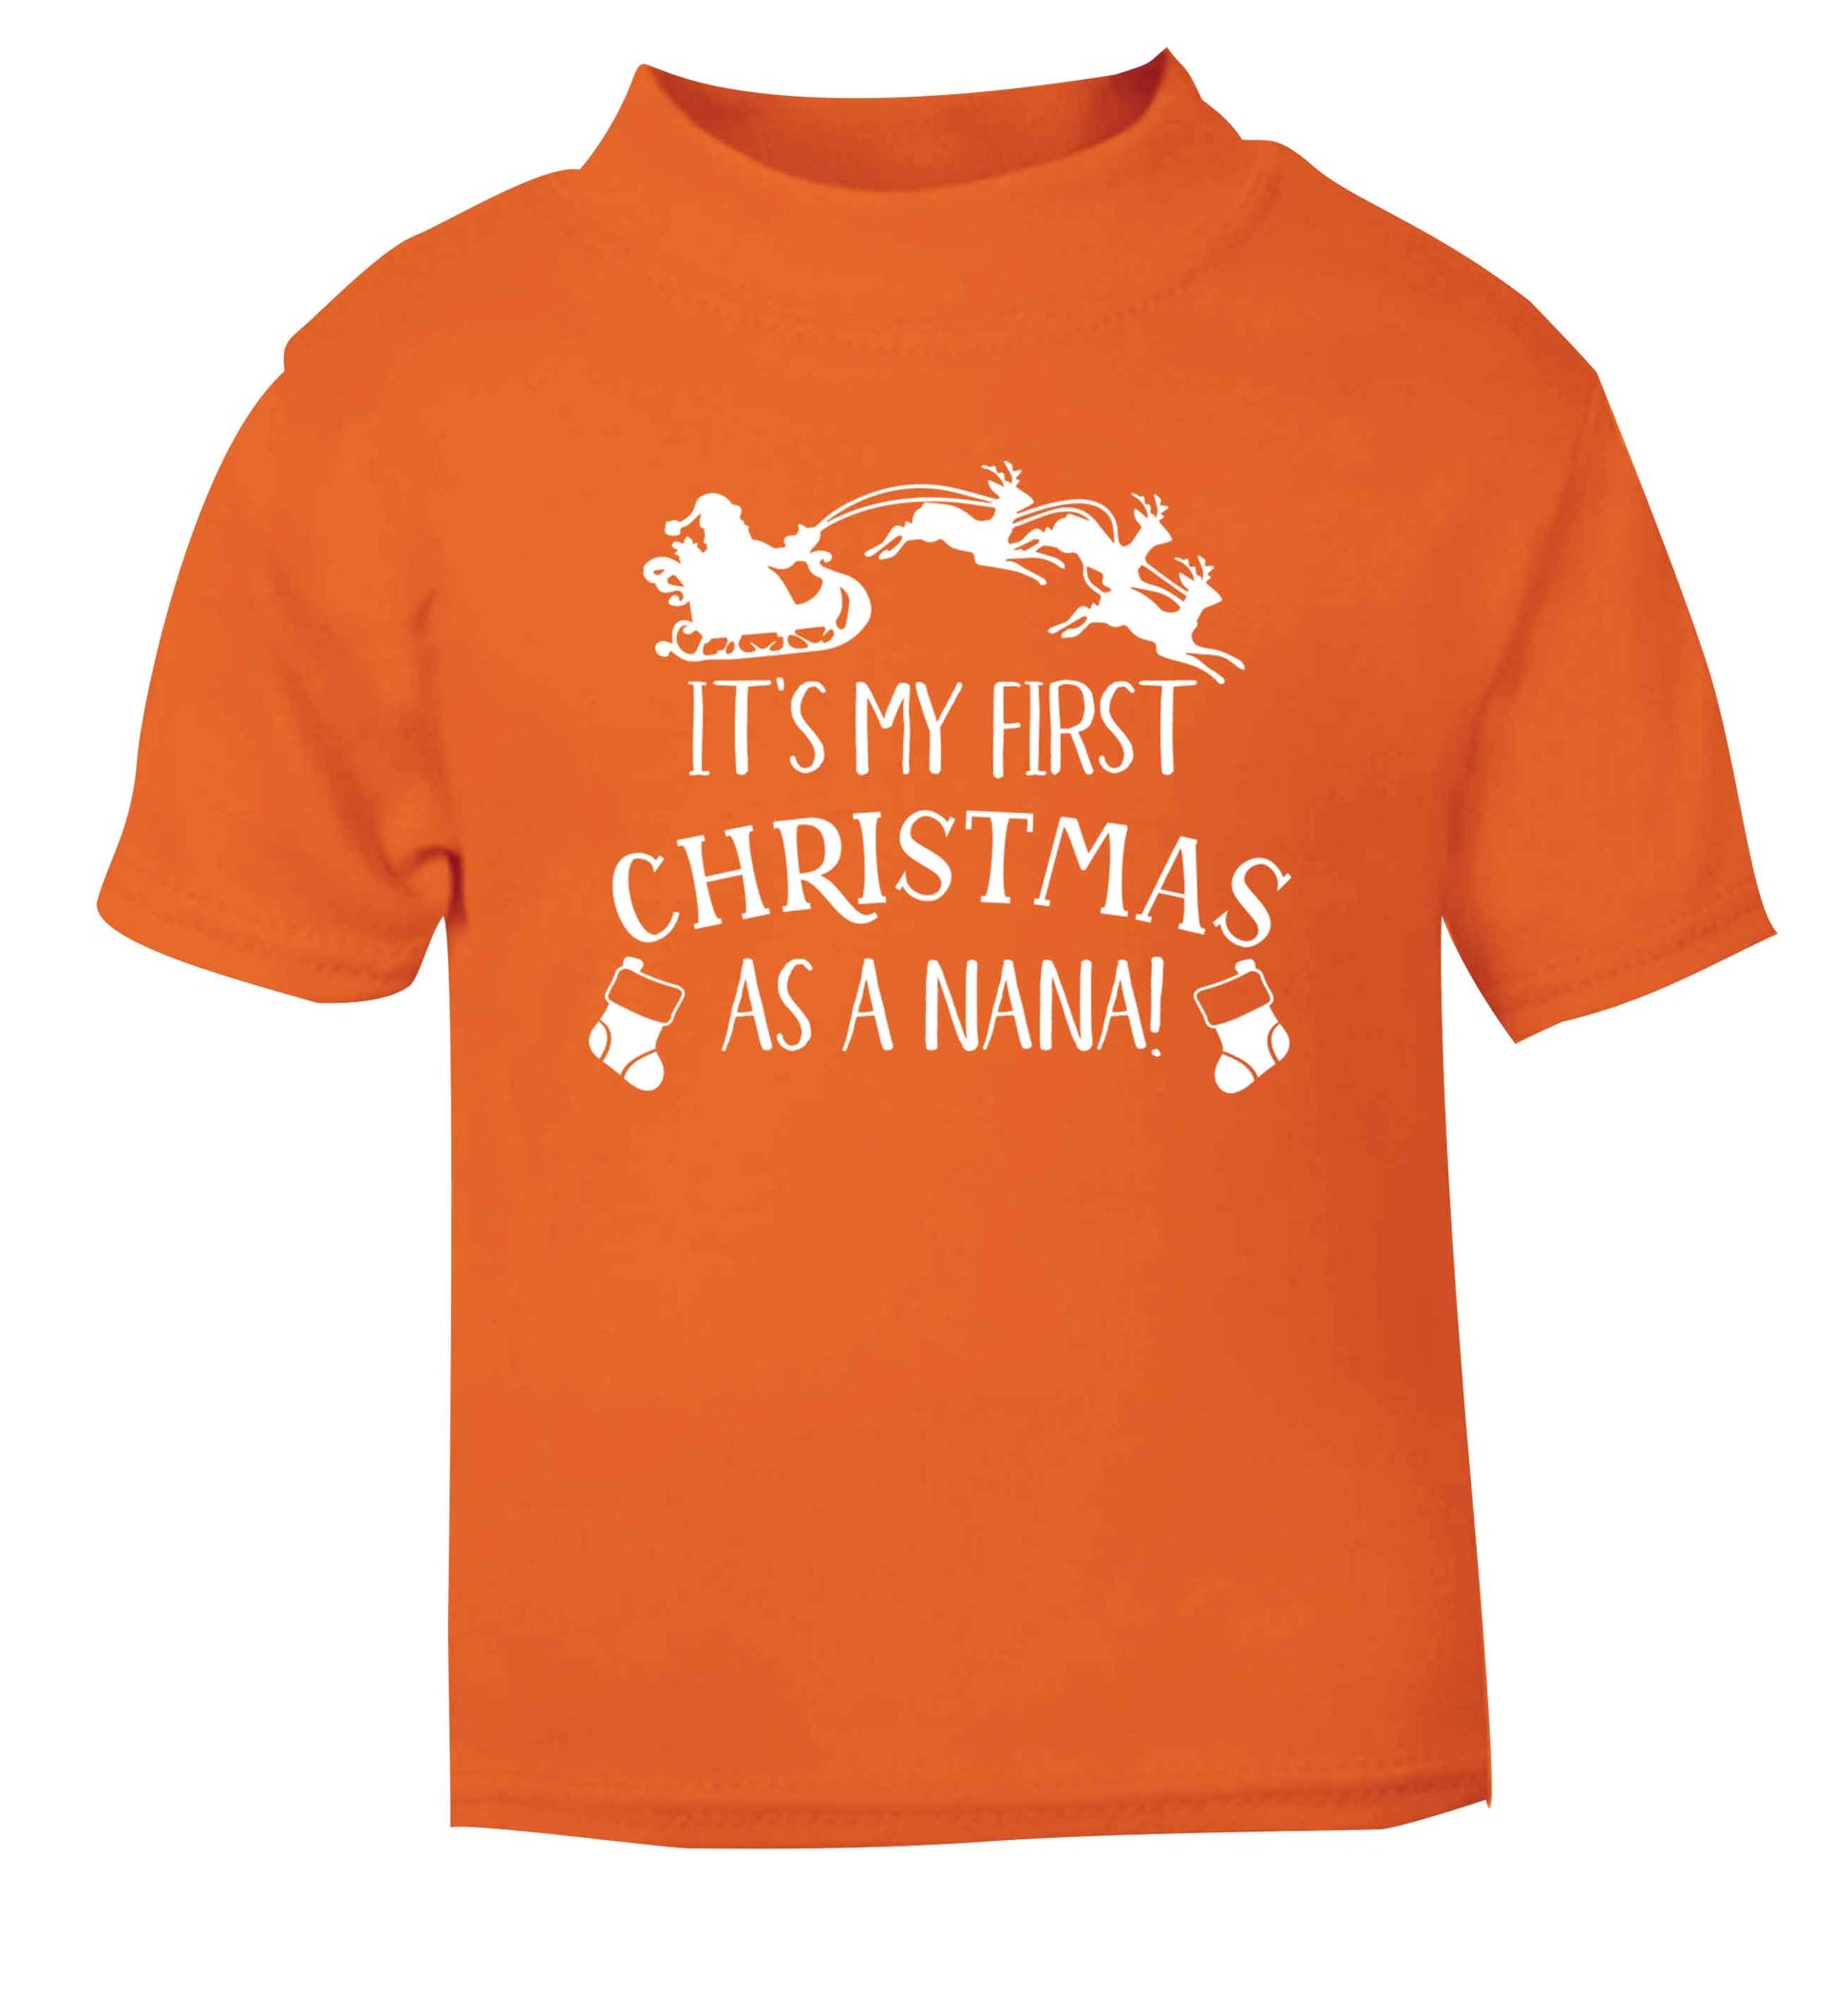 It's my first Christmas as a nana orange Baby Toddler Tshirt 2 Years